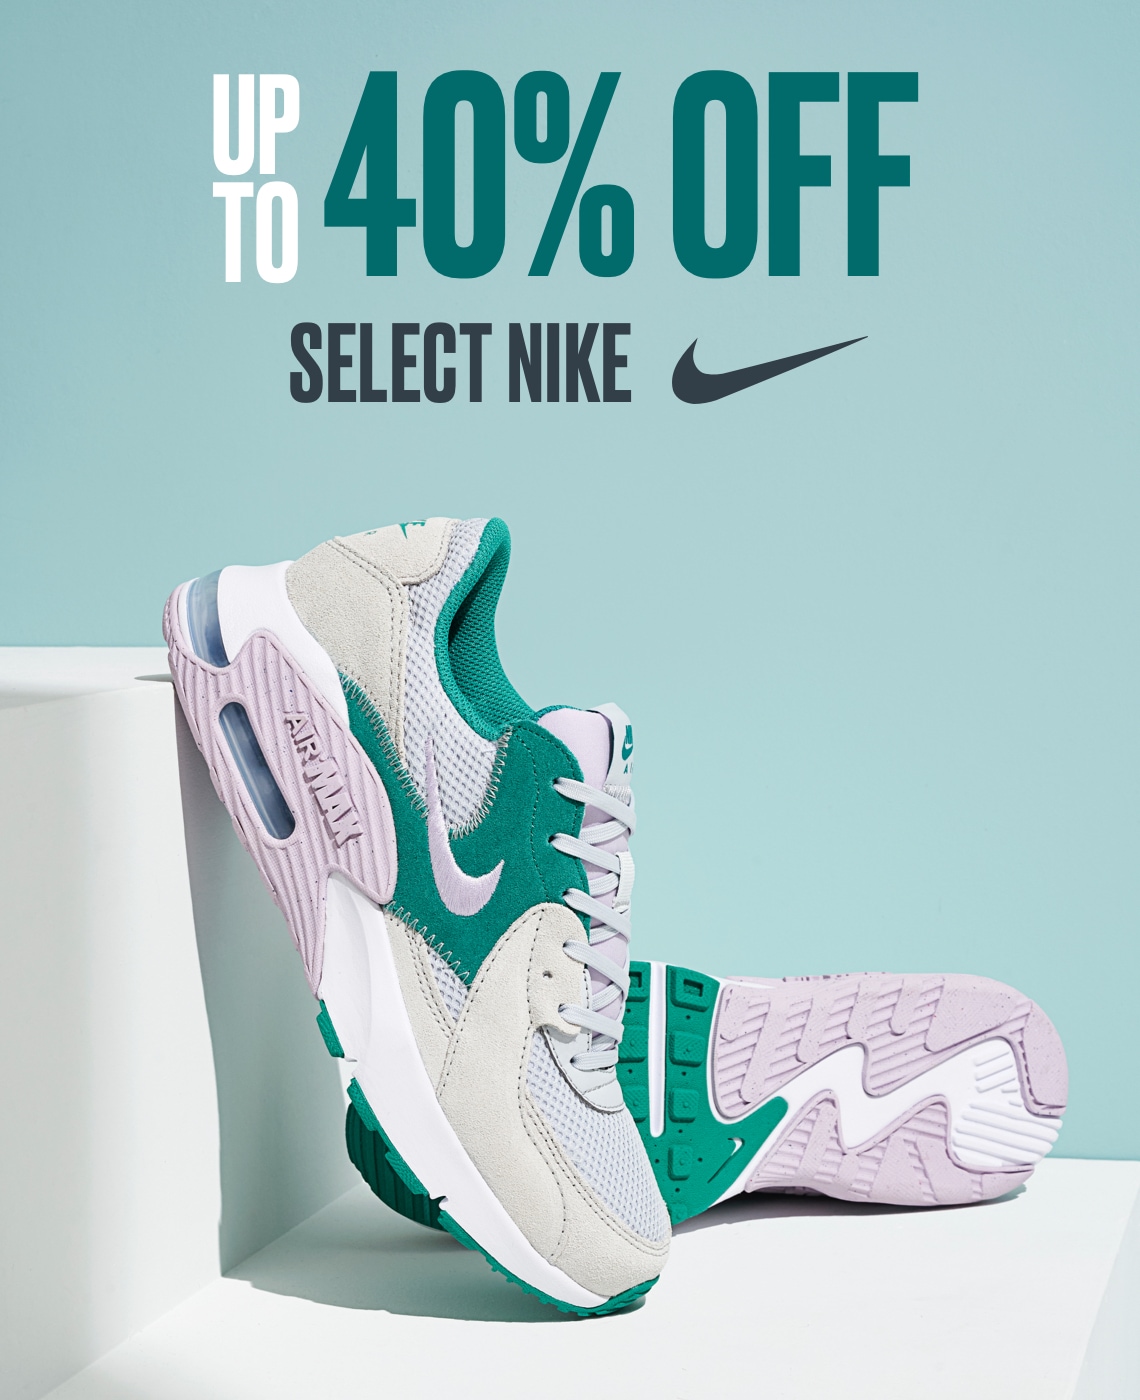 Up to 40% off Select Nike